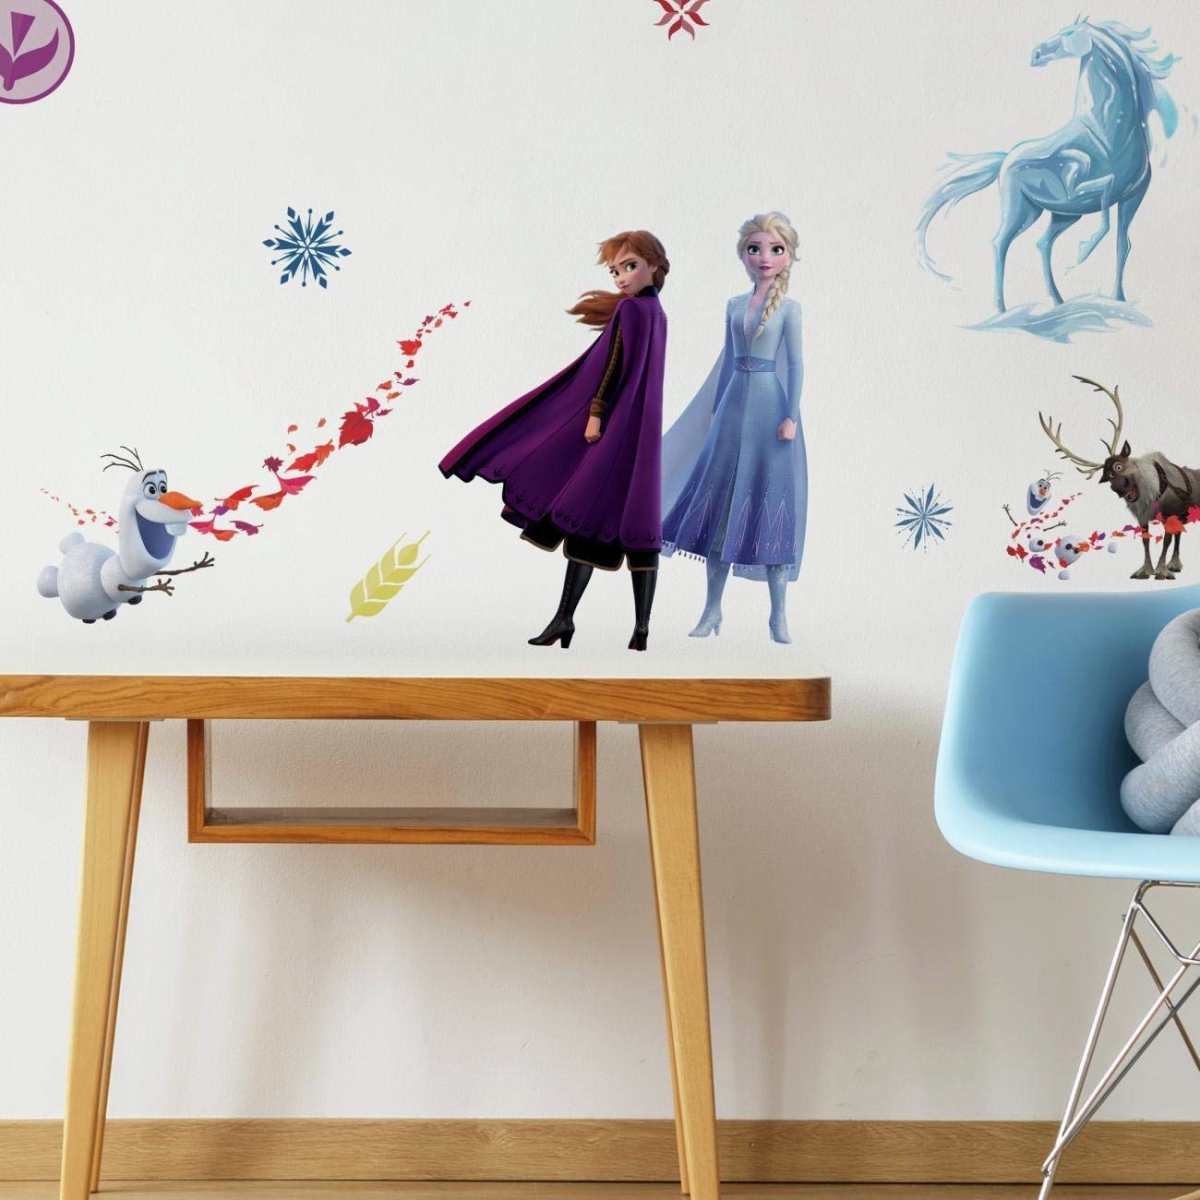 Picture of Roommates RMK4075SCS Frozen II Decorative Wall Decals Sticker - Blue White & Purple